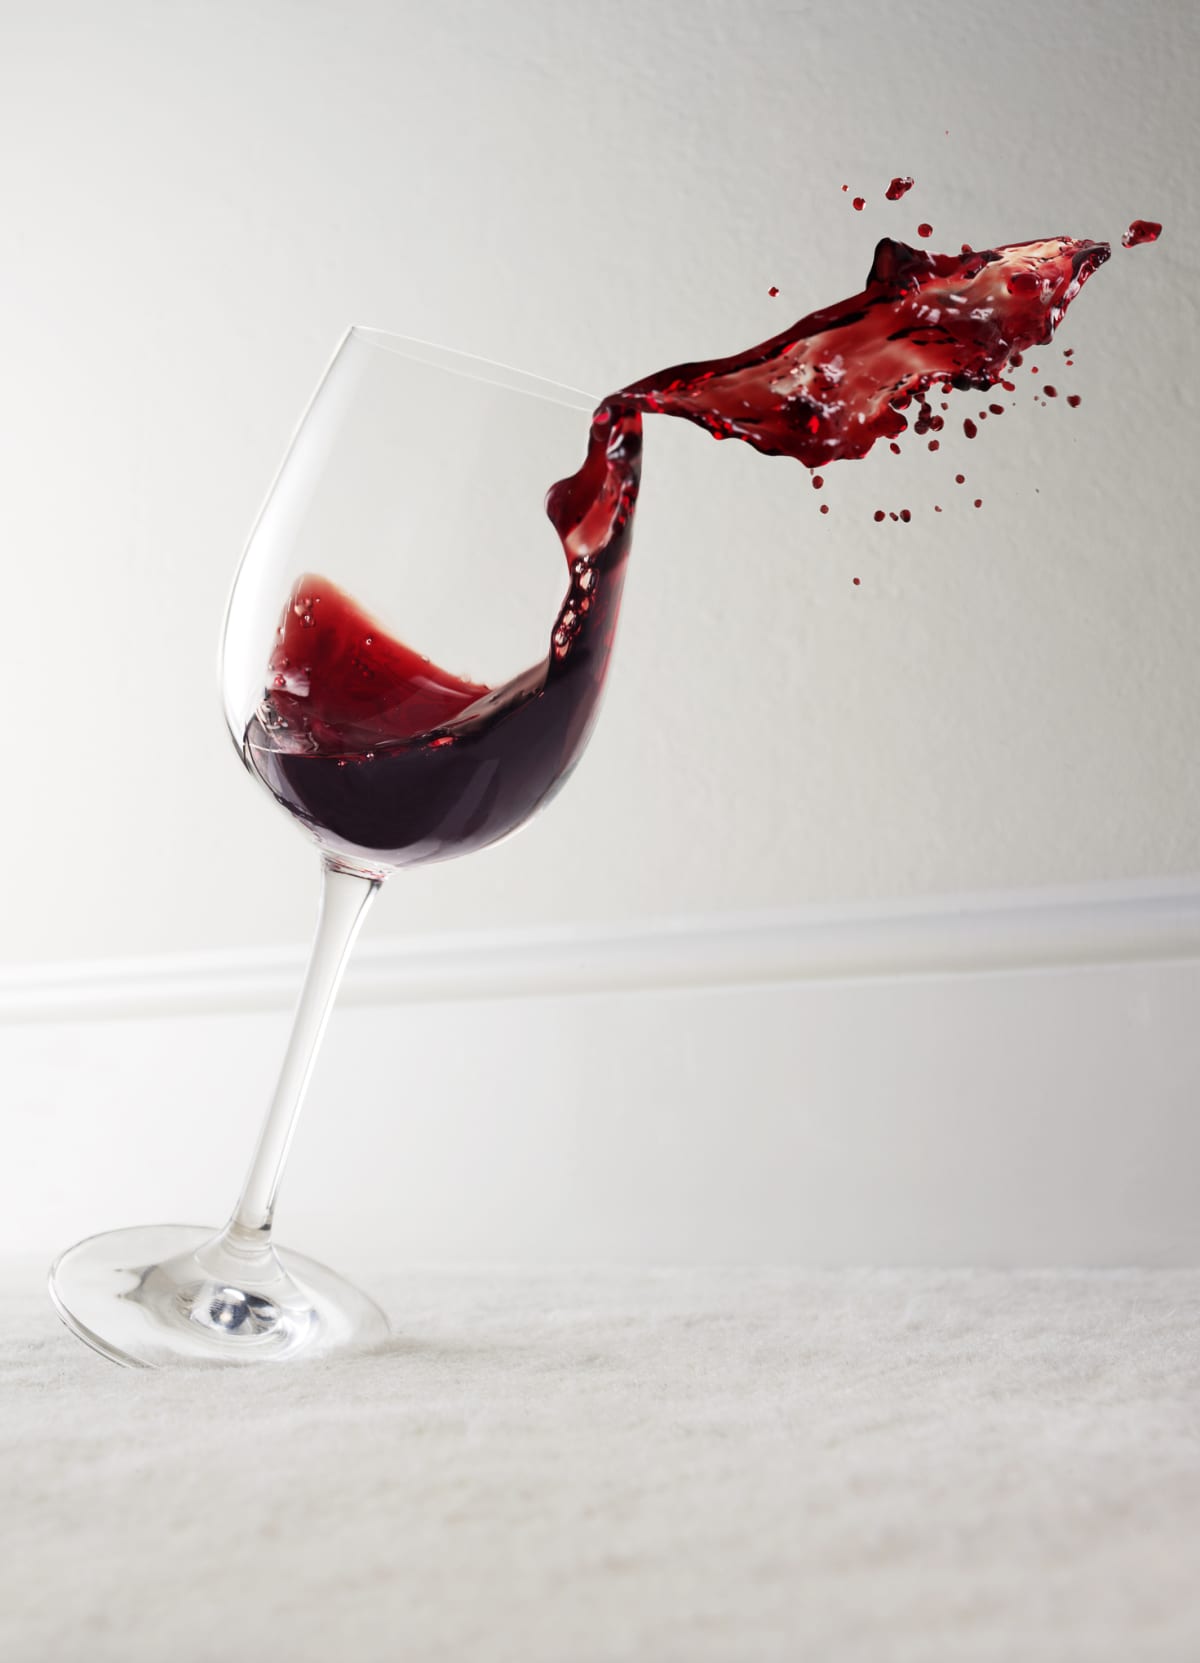 Glass of red wine tipping over and spilling